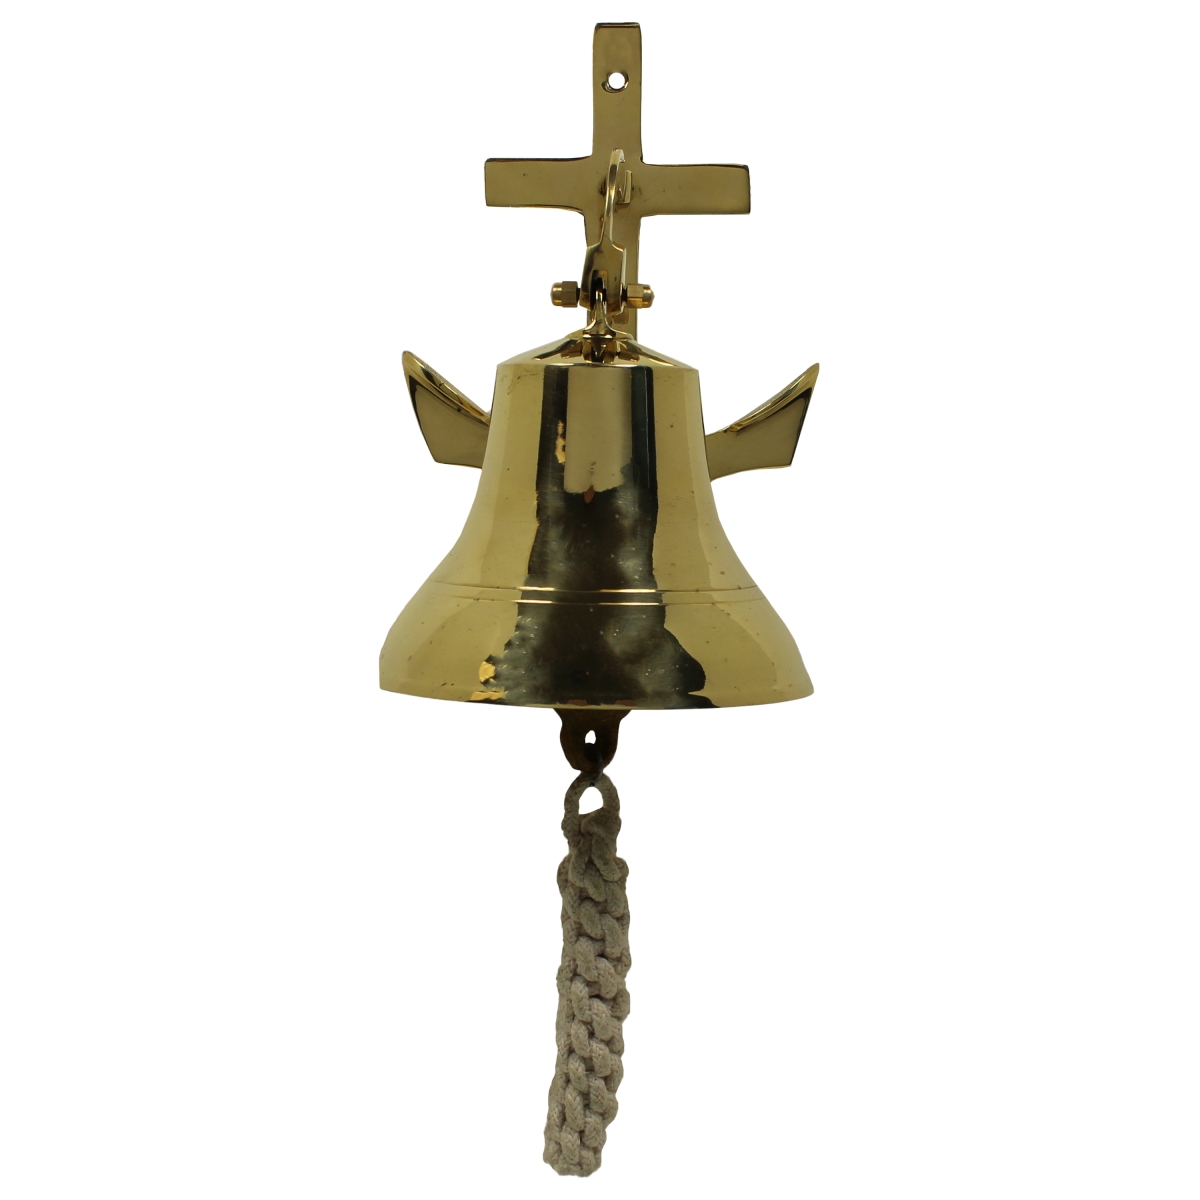 Urban Designs 8800109 8.5 X 6 X 7 In. Nautical Solid Brass Ship Bell With Anchor Mounting Bracket, Small